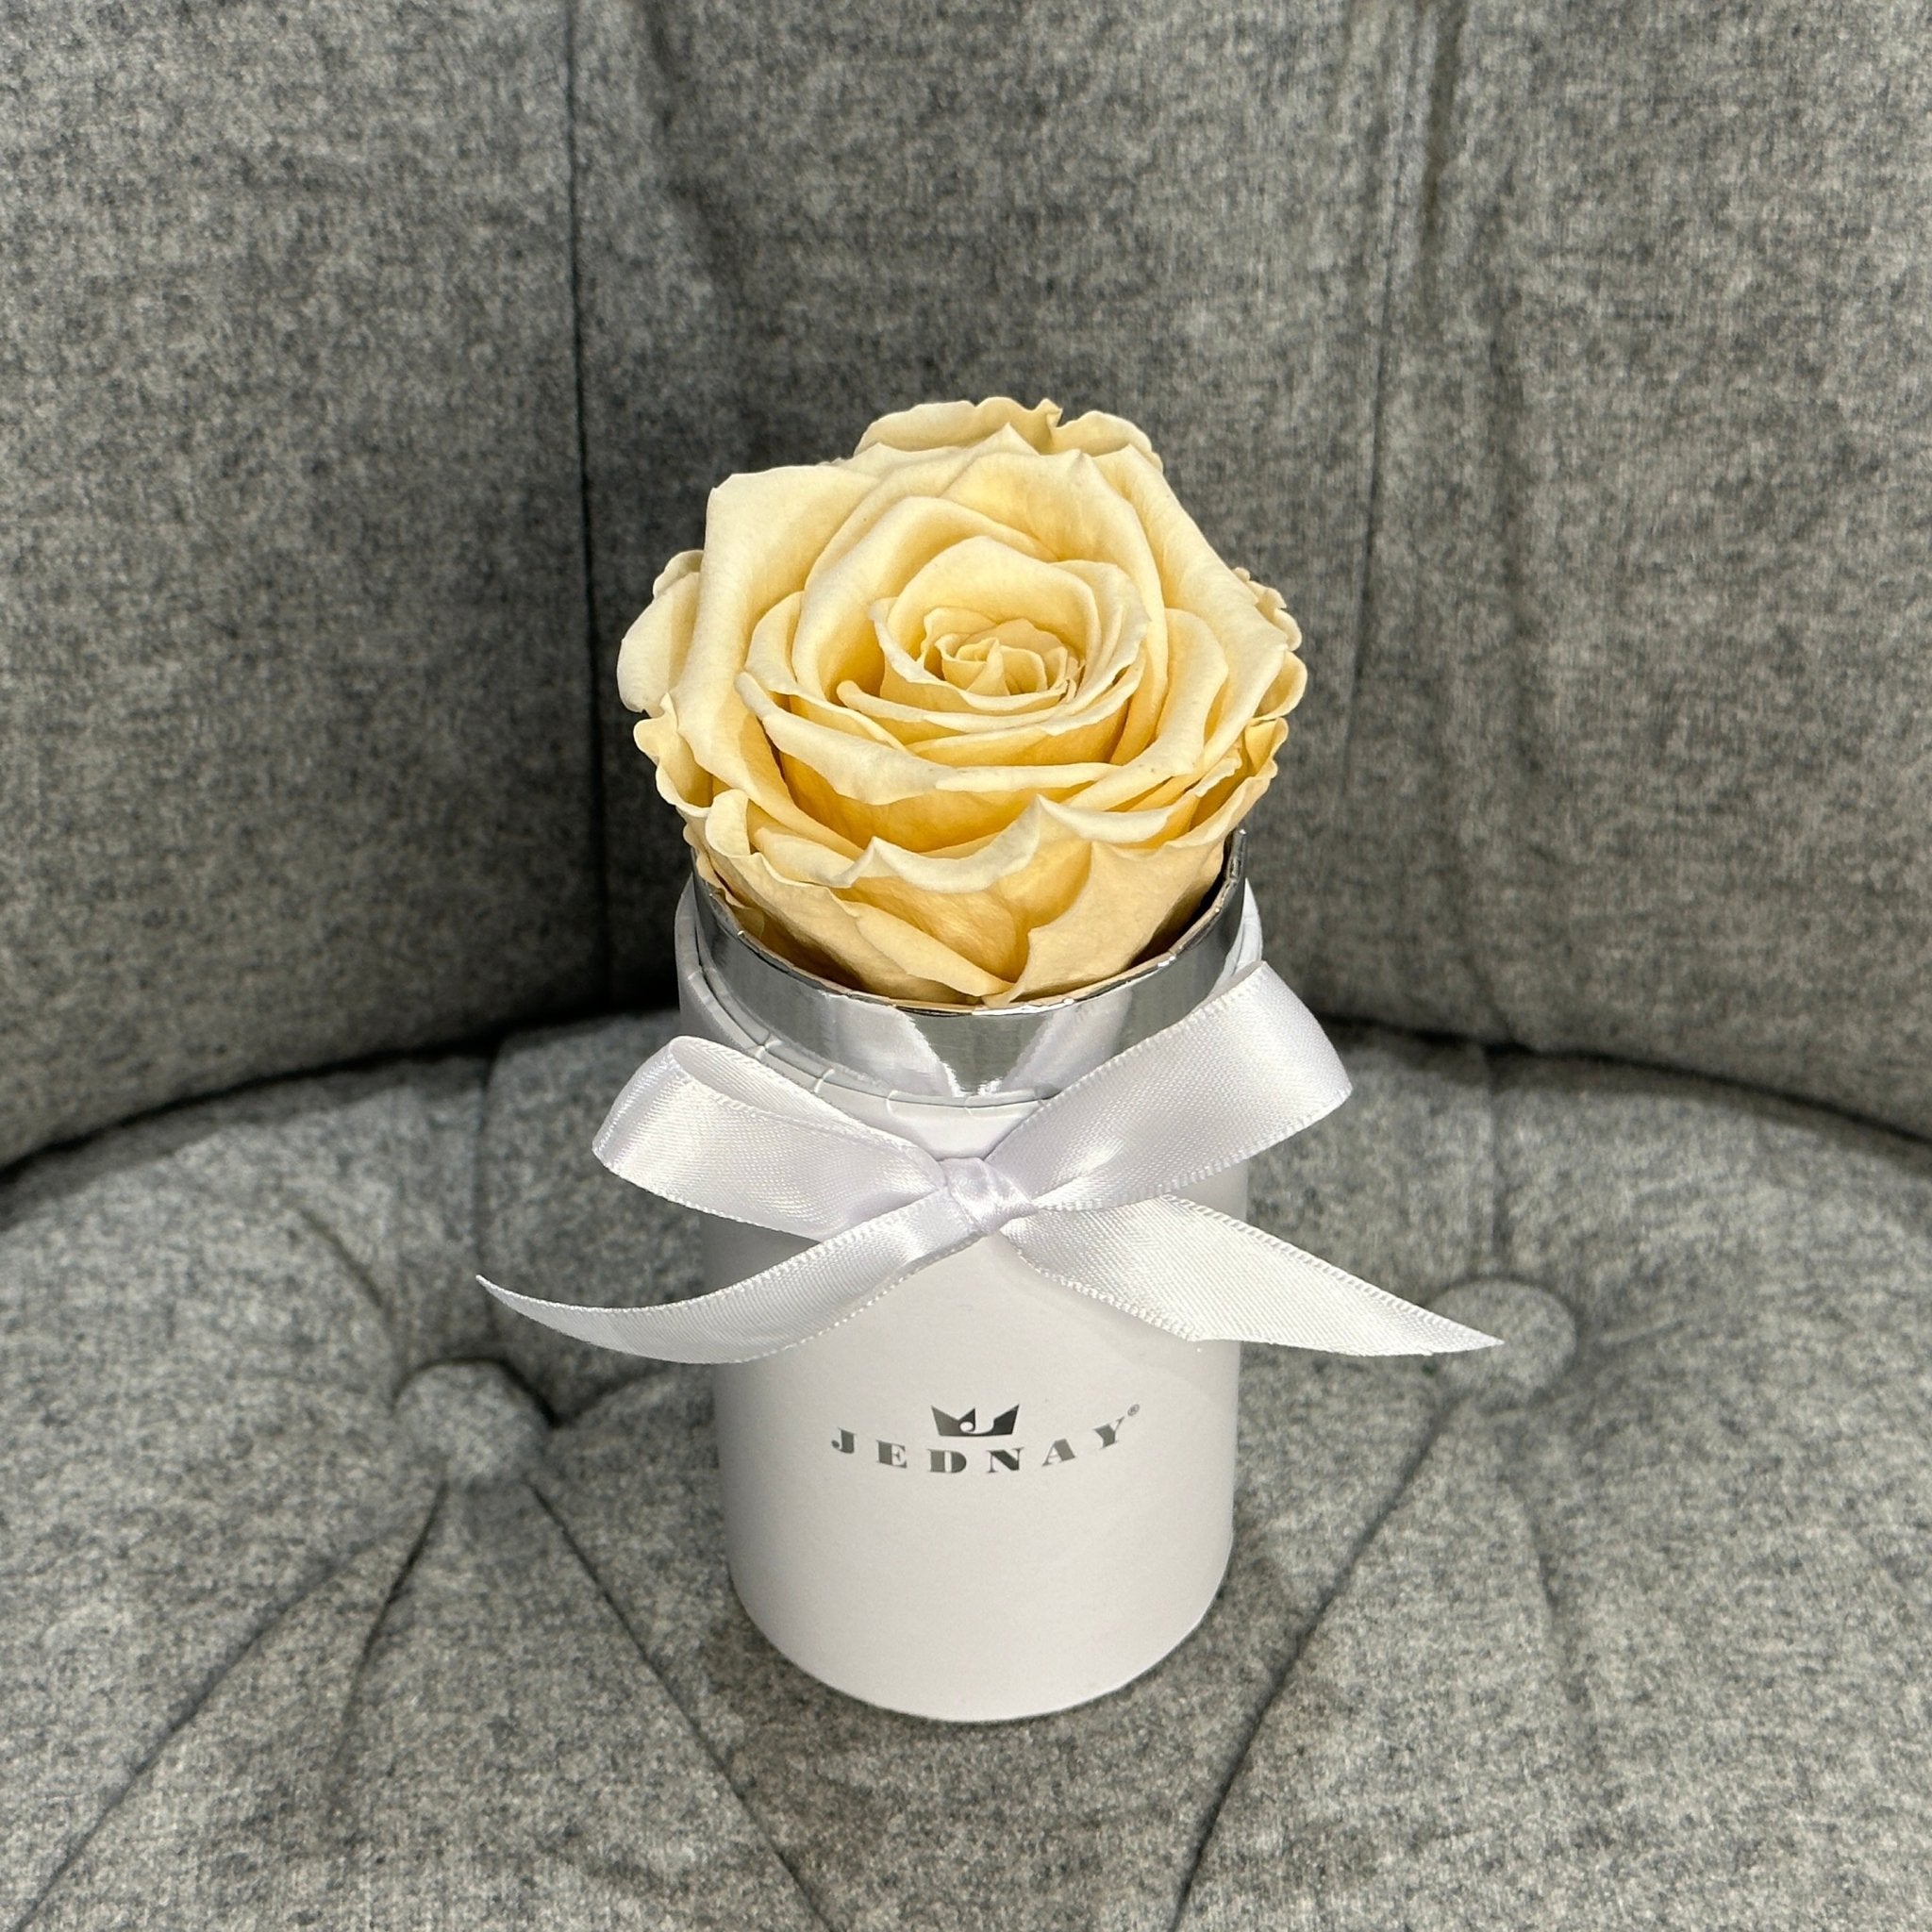 The Uno - Champagne Eternal Rose - Classic White Box - Jednay Roses